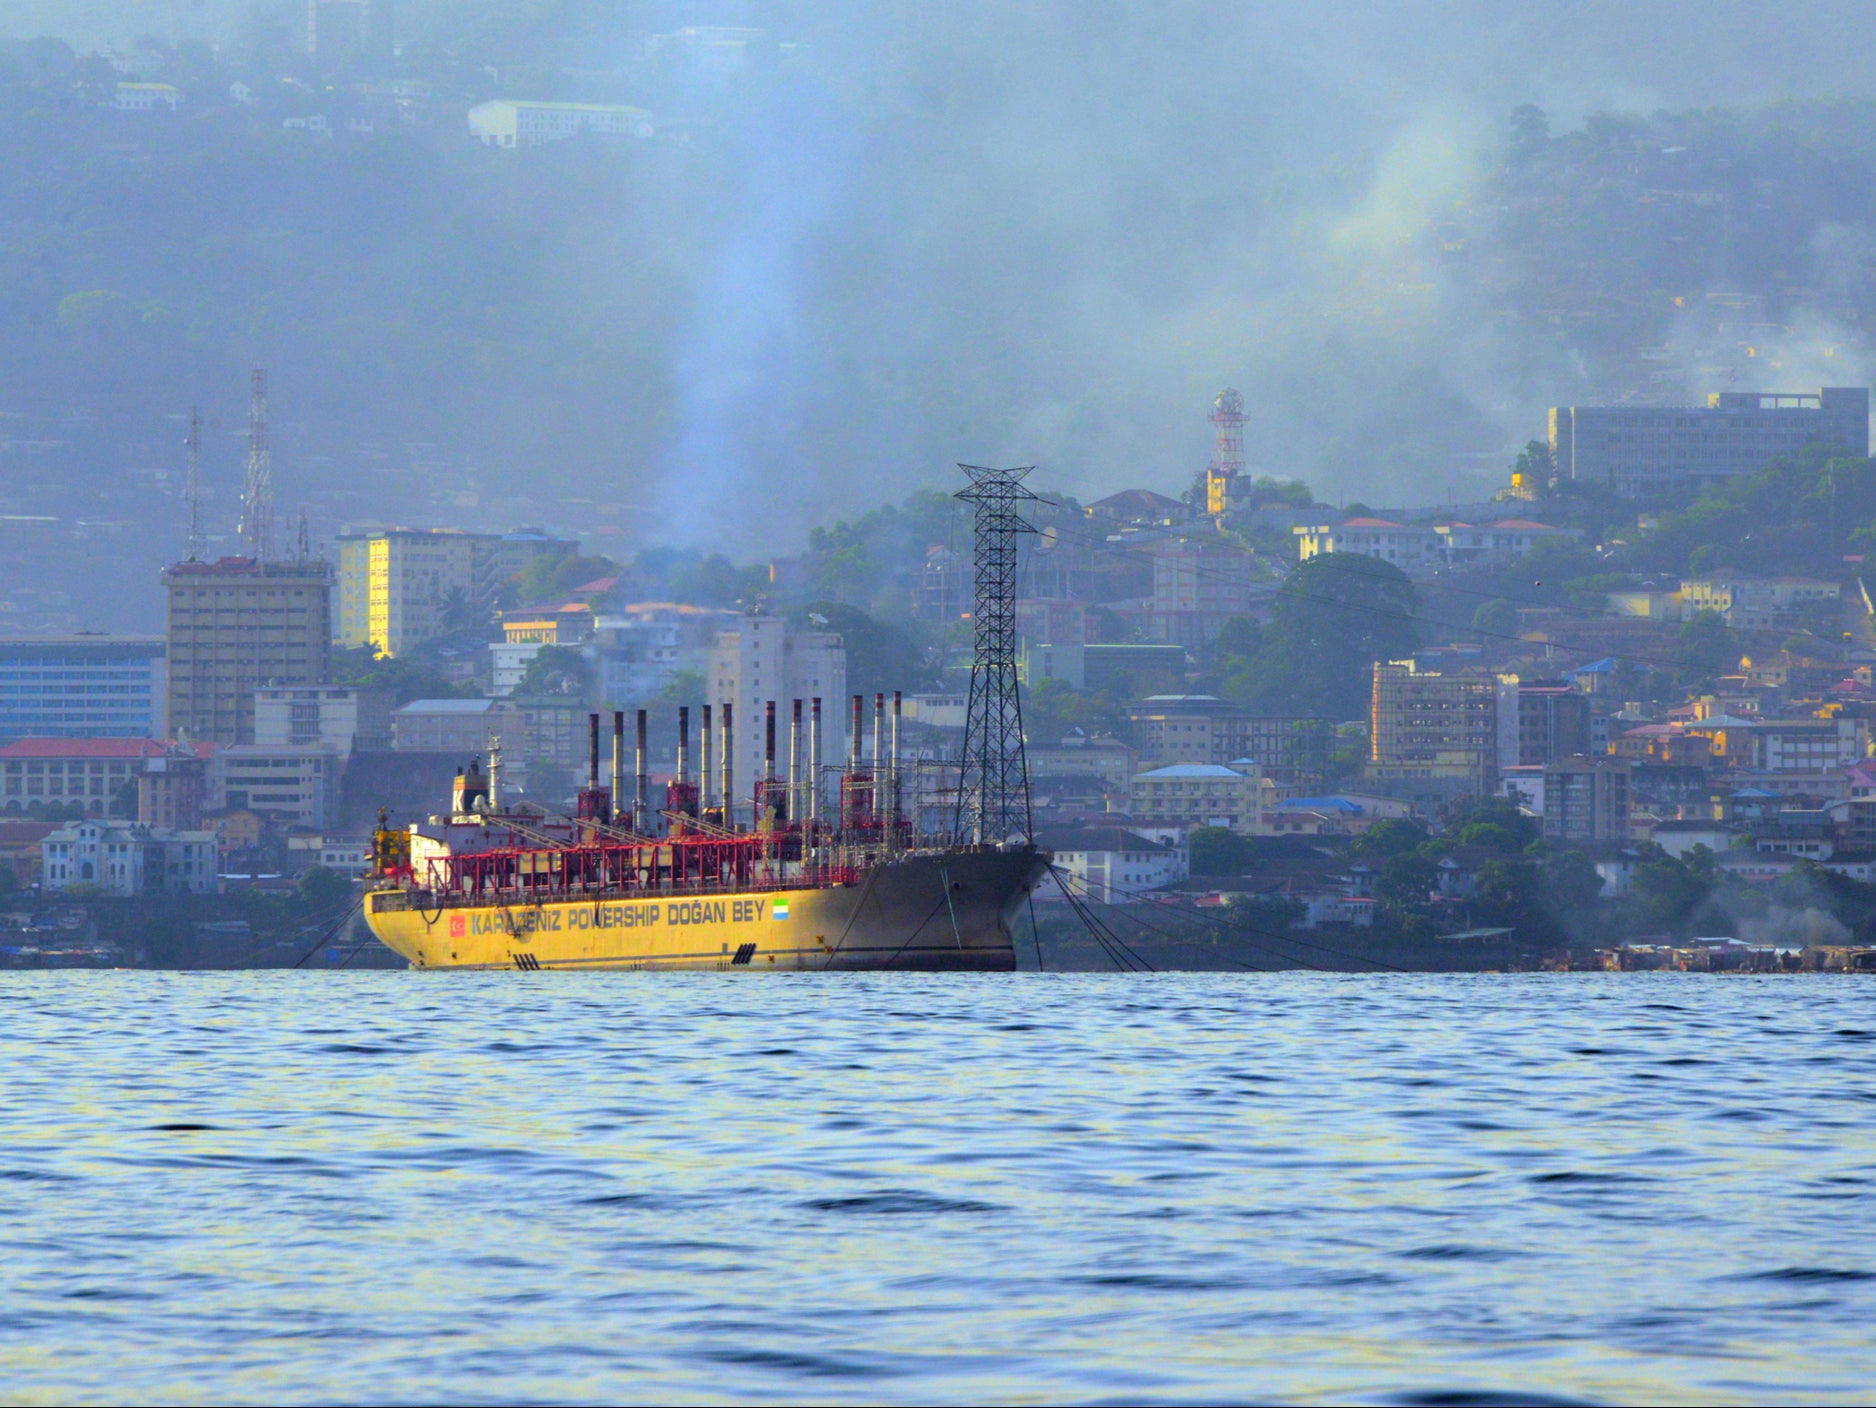 Smoke rises over a port in Freetown, the capital of Sierra Leone in West Africa